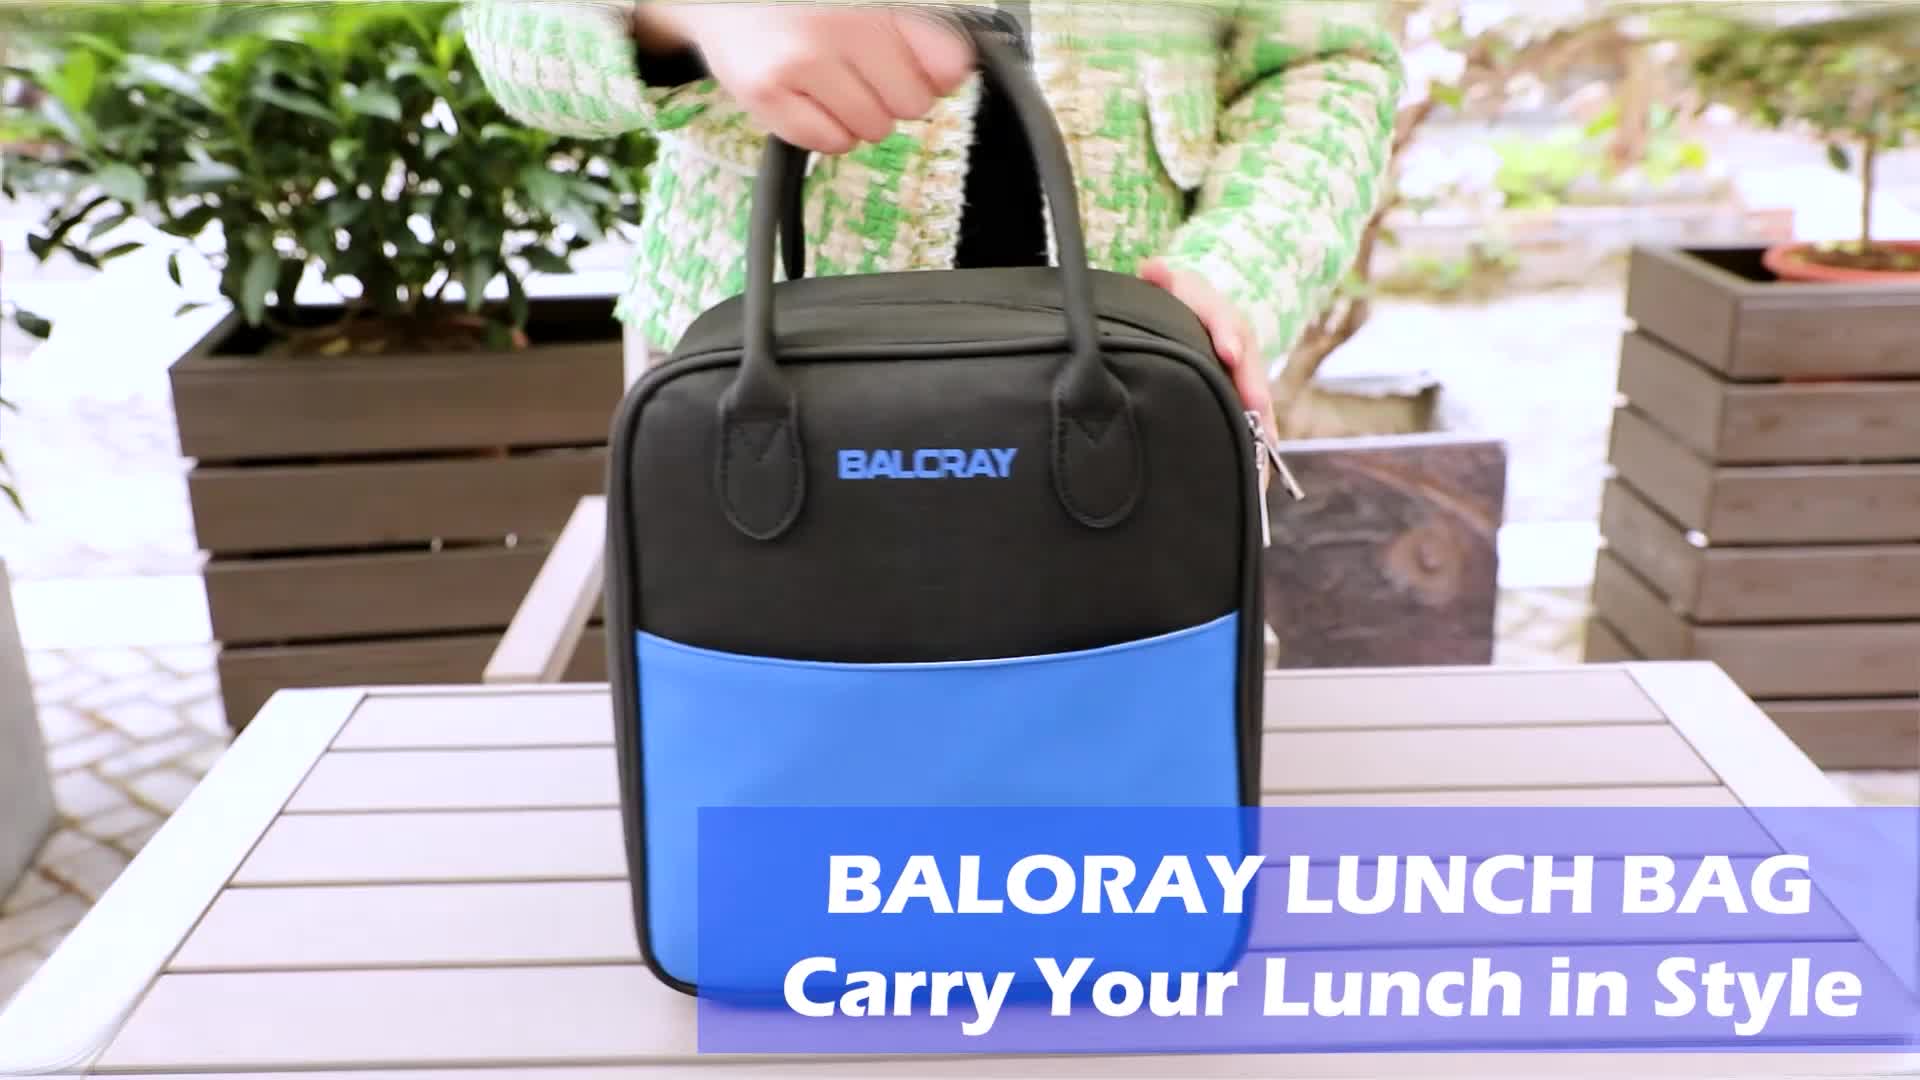 BALORAY Lunch Bag Review: A Stylish Way To Carry Lunch